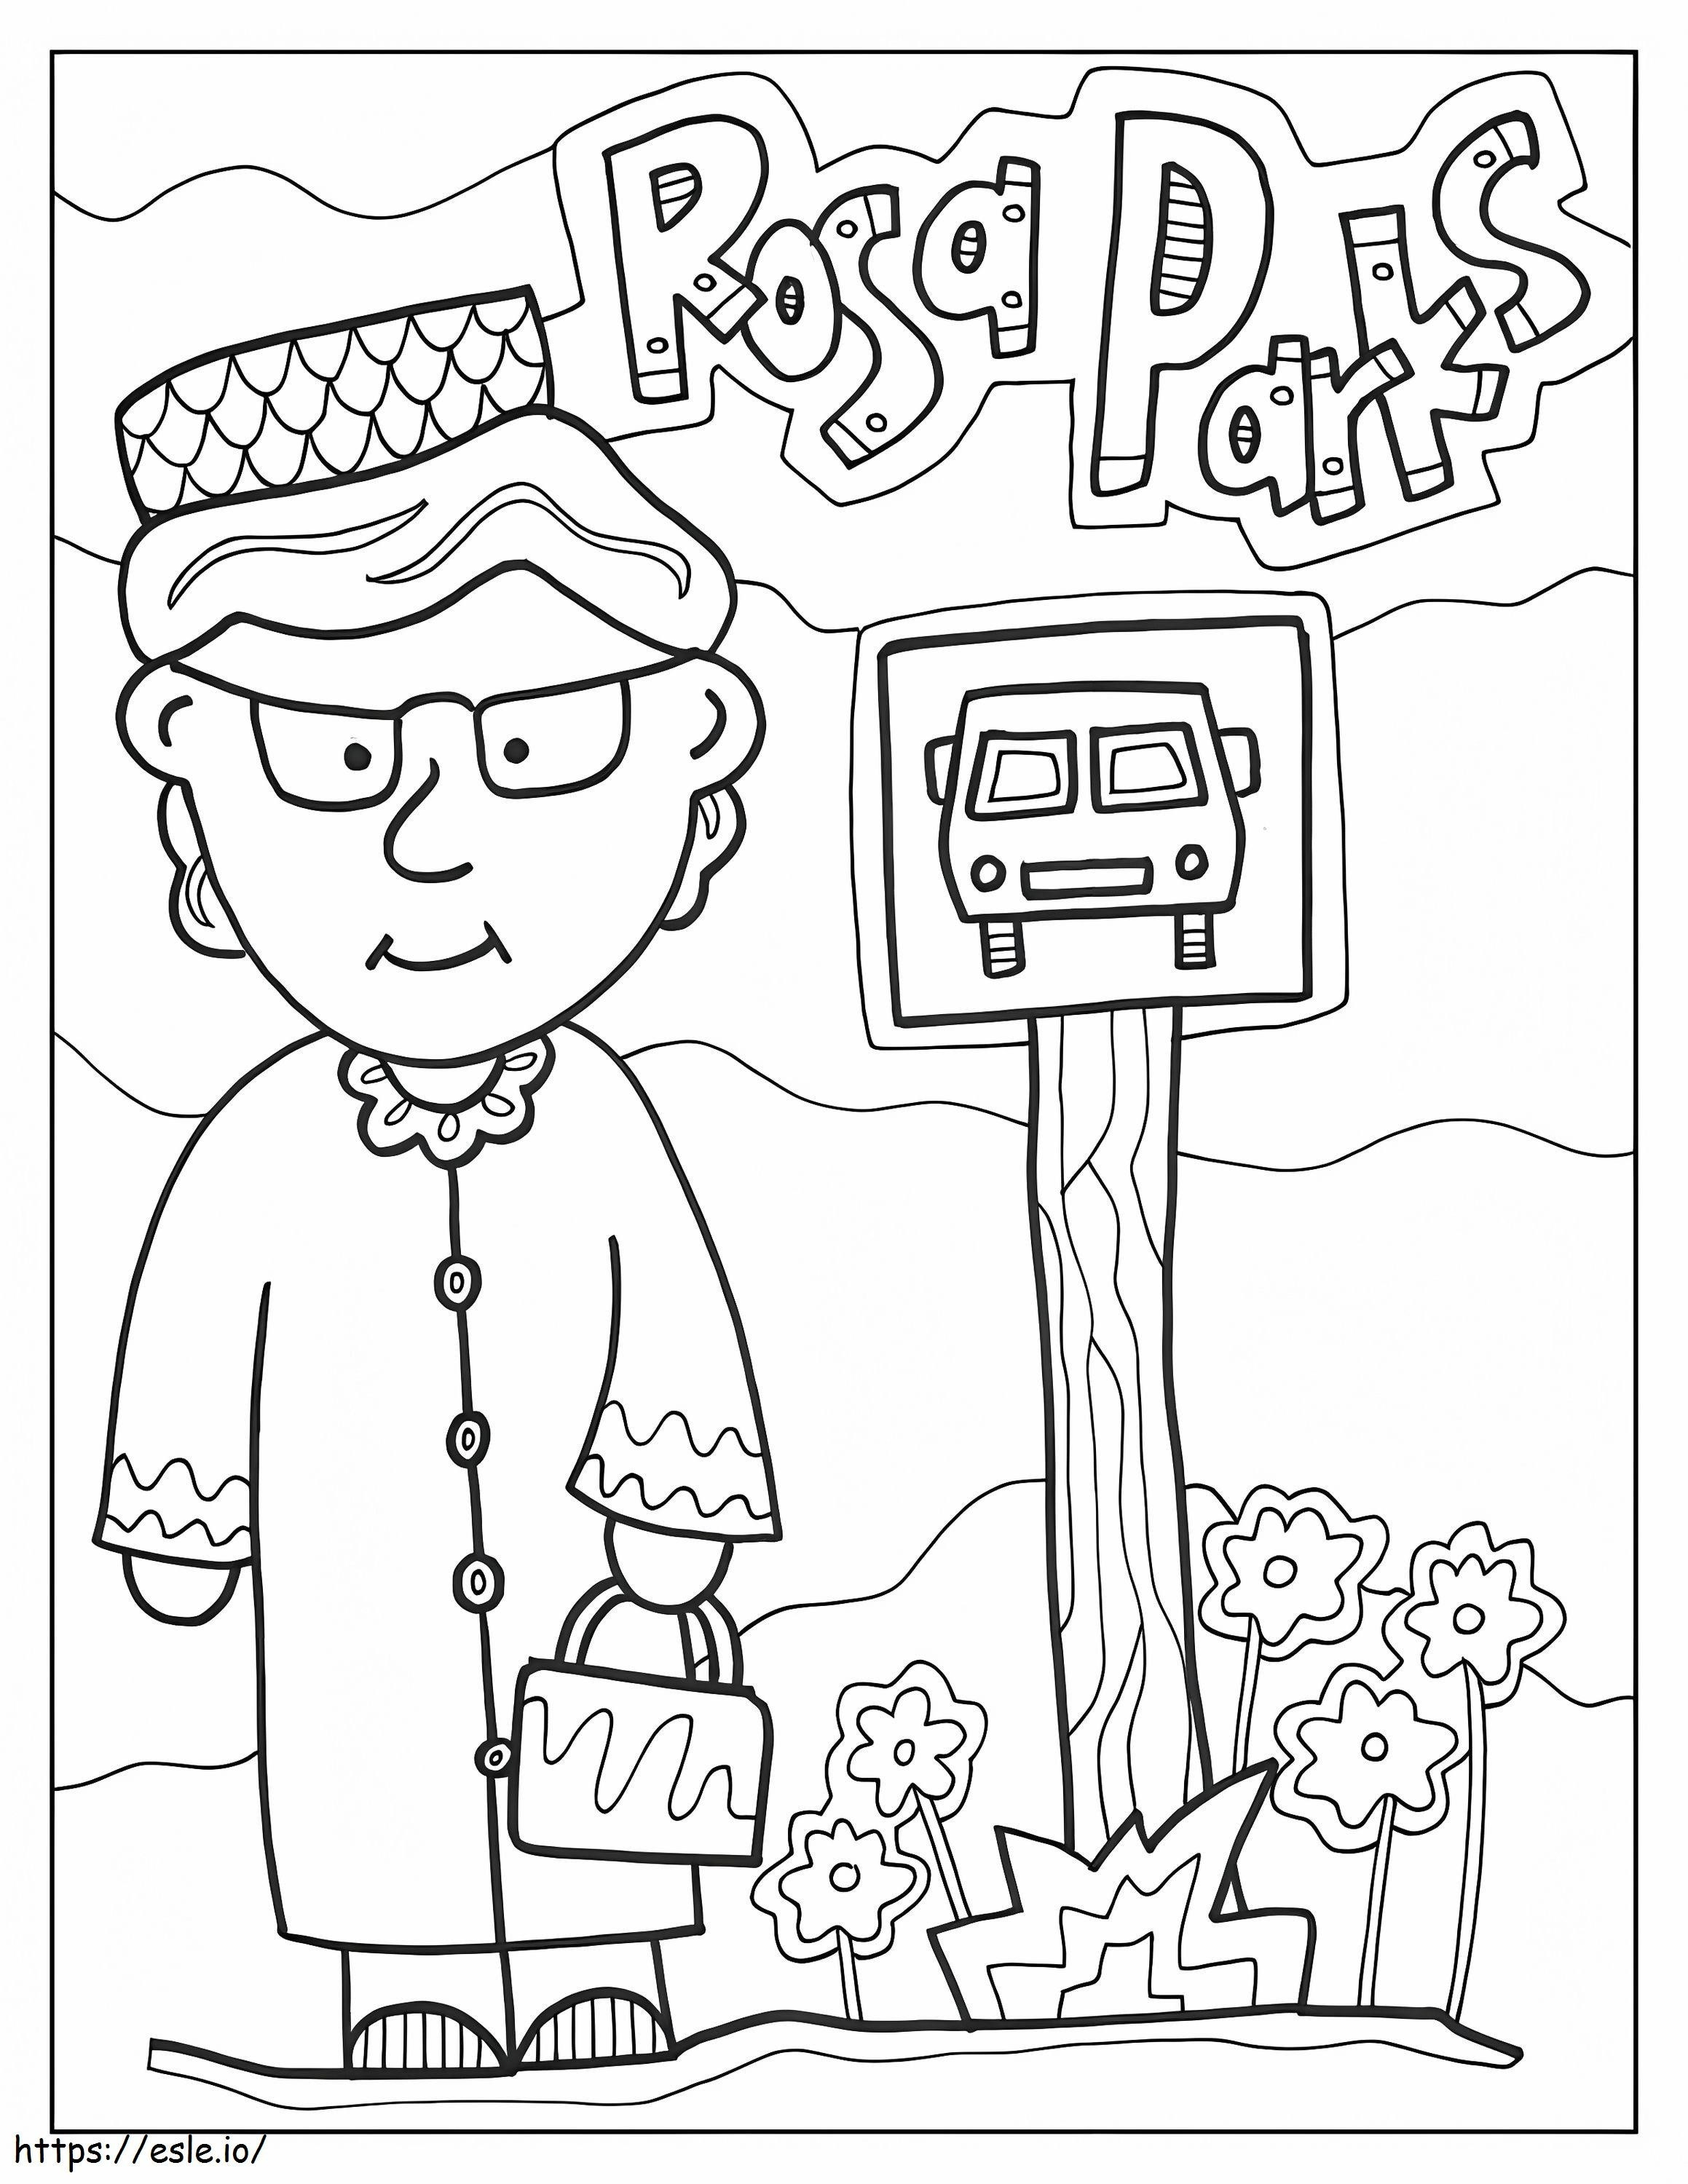 Black History Month 5 coloring page